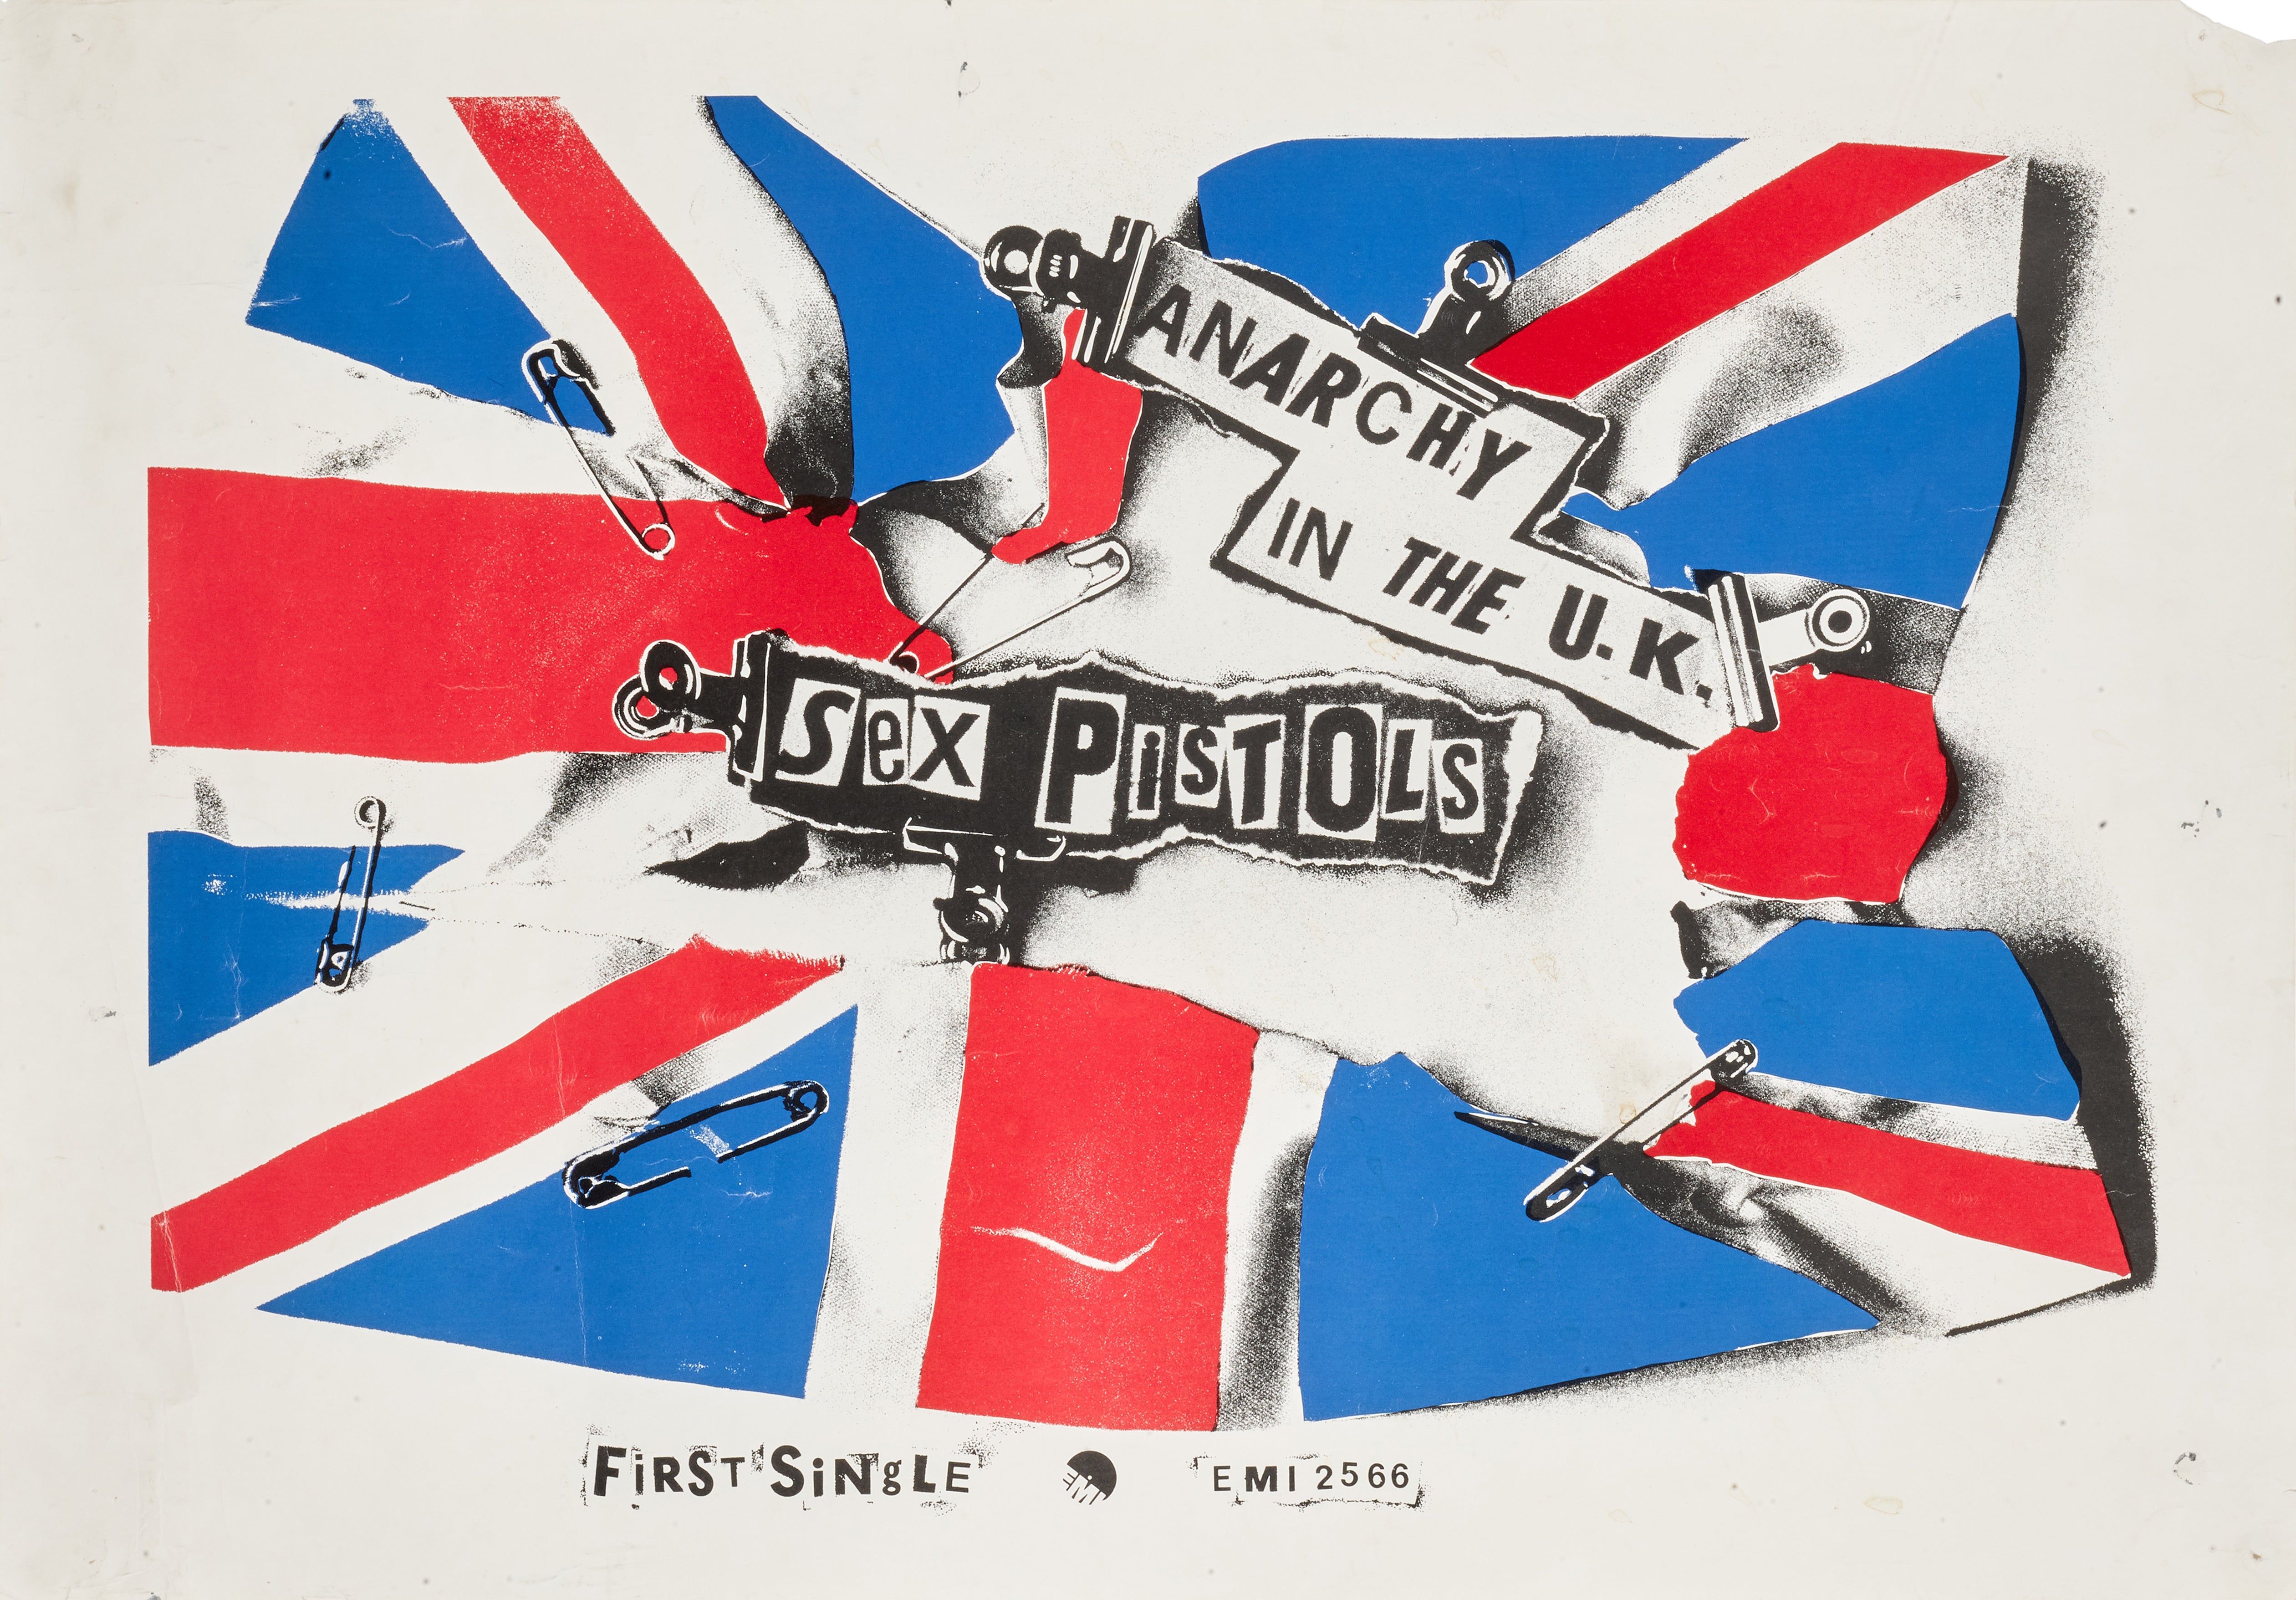 Lot 14, Jamie Reid, Anarchy in the UK, promotional poster, owned by Sid Vicious, est ?3,000- 5,000 (Sotheby’s/PA)